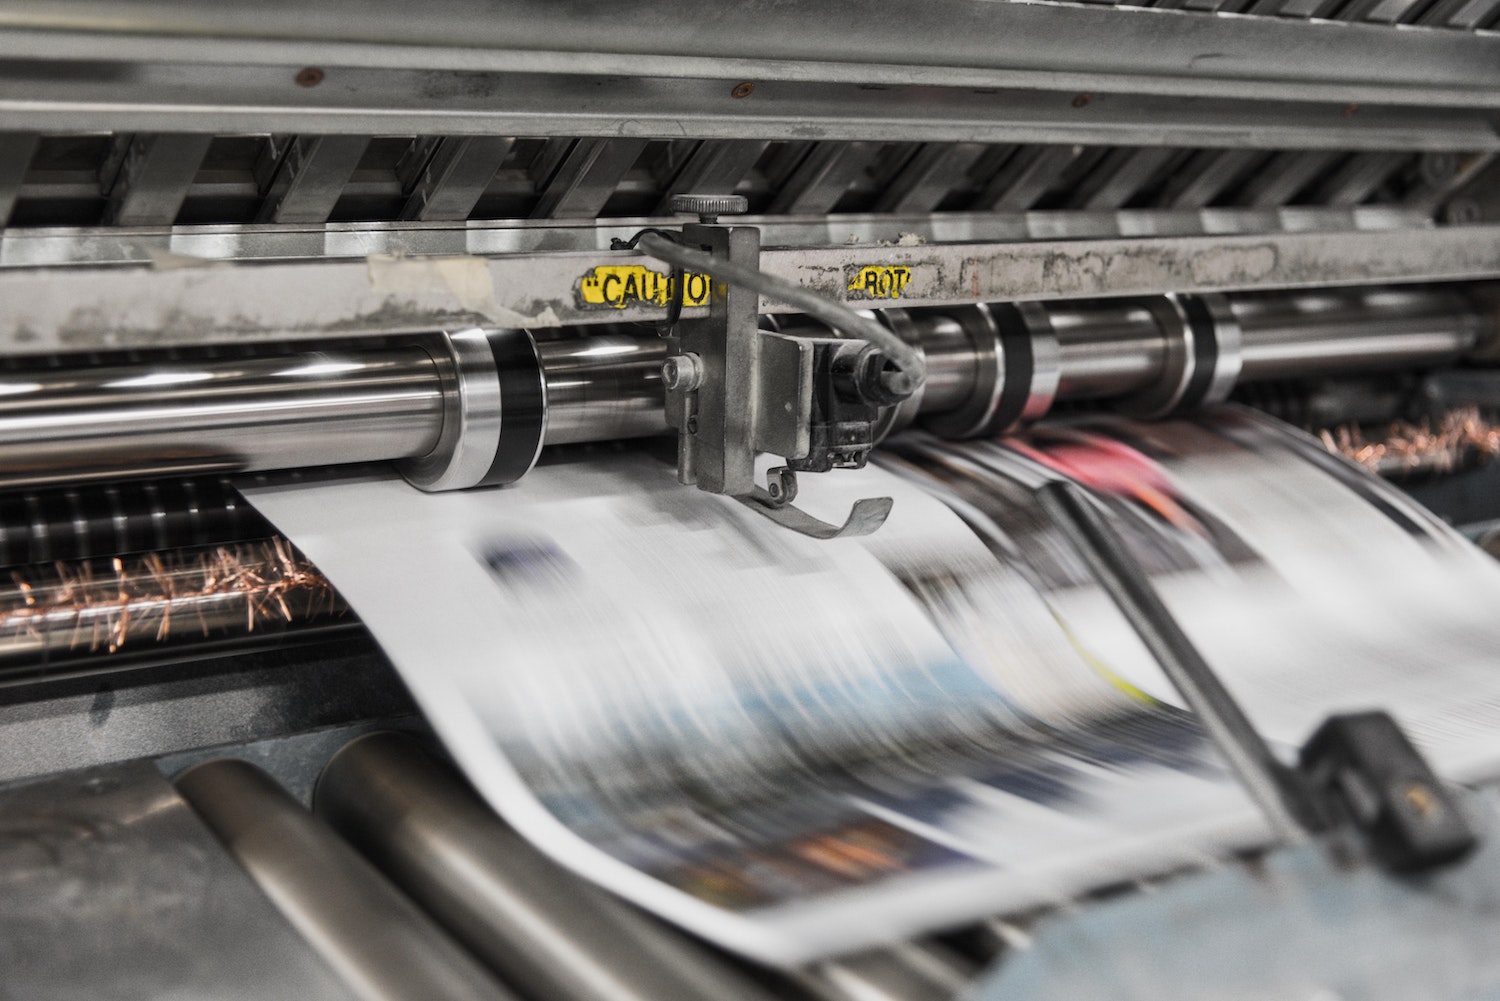 #2022 Trends to Watch in Wide-Format Printing